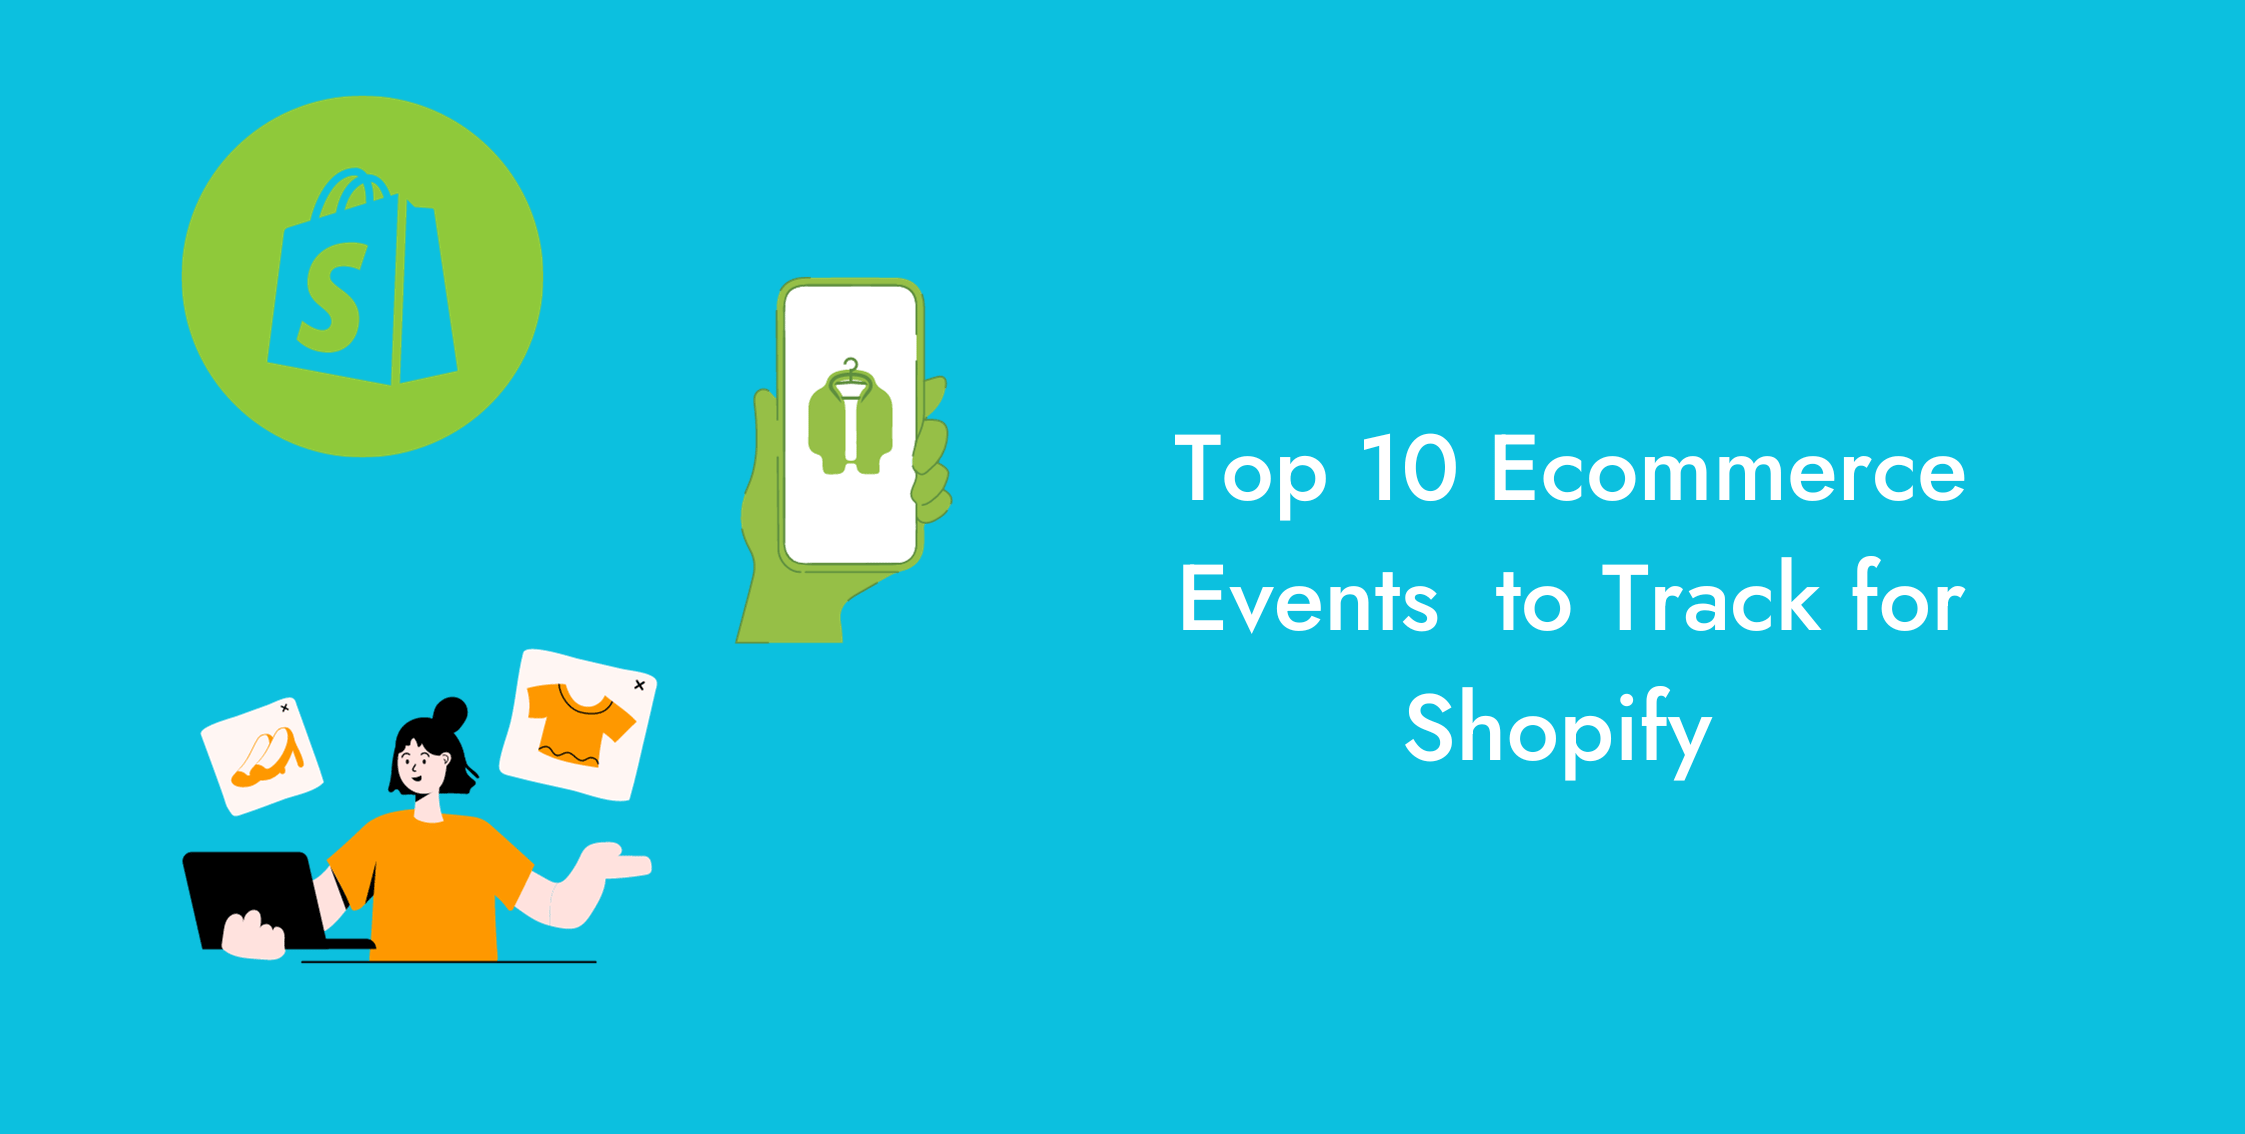 Top 10 E-commerce Events To Track For Shopify Stores